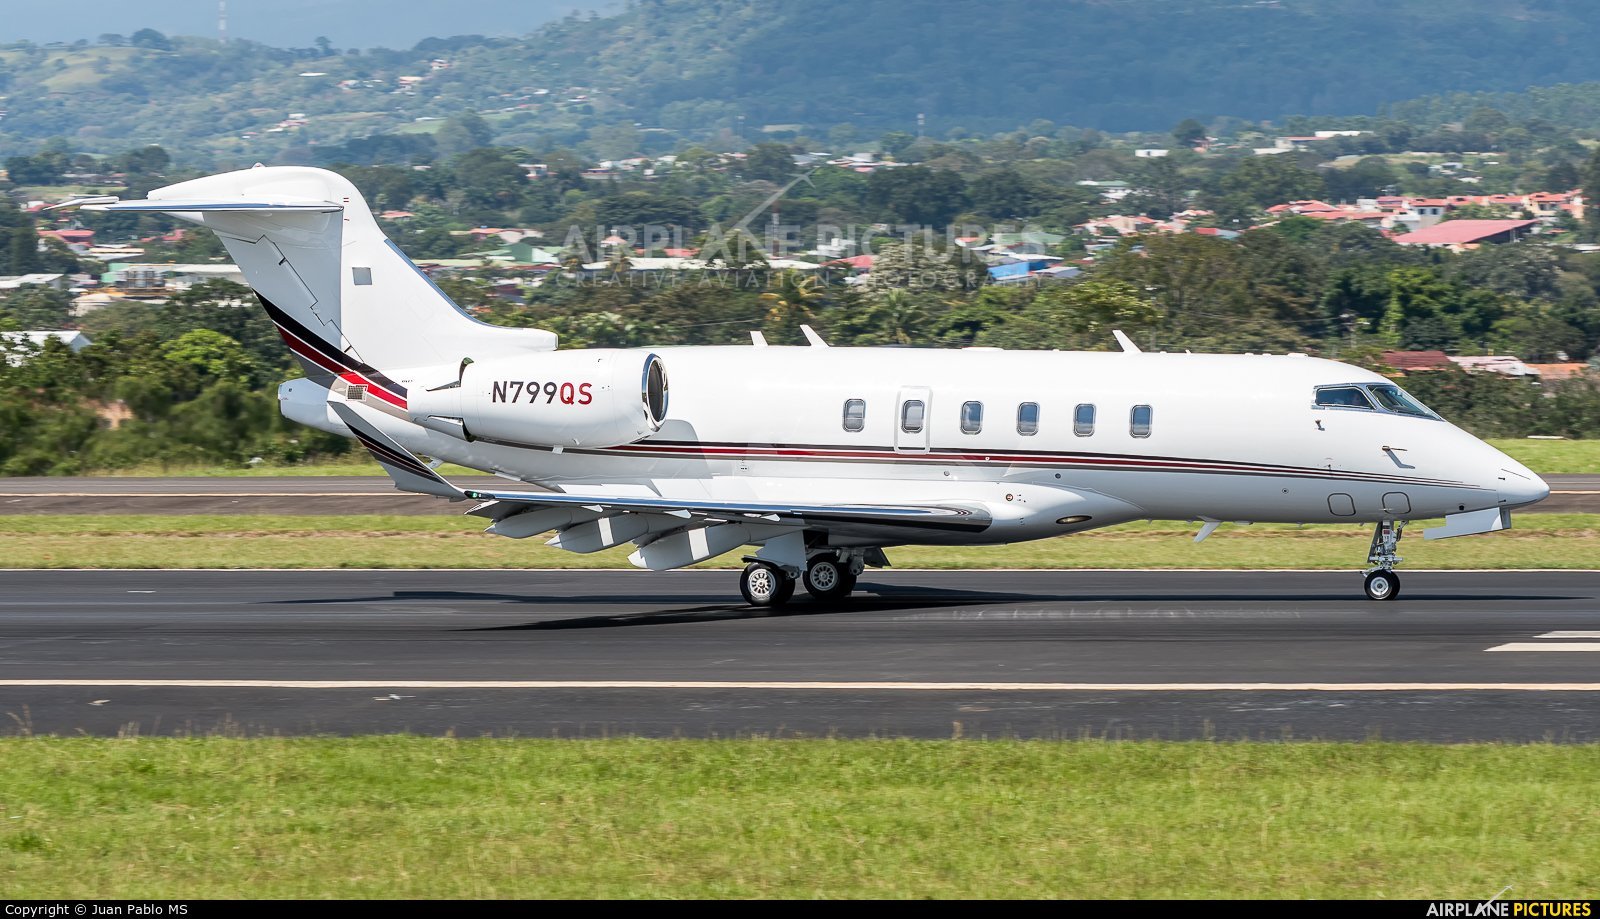 N799QS Bombardier Jerry Seinfeld private jet